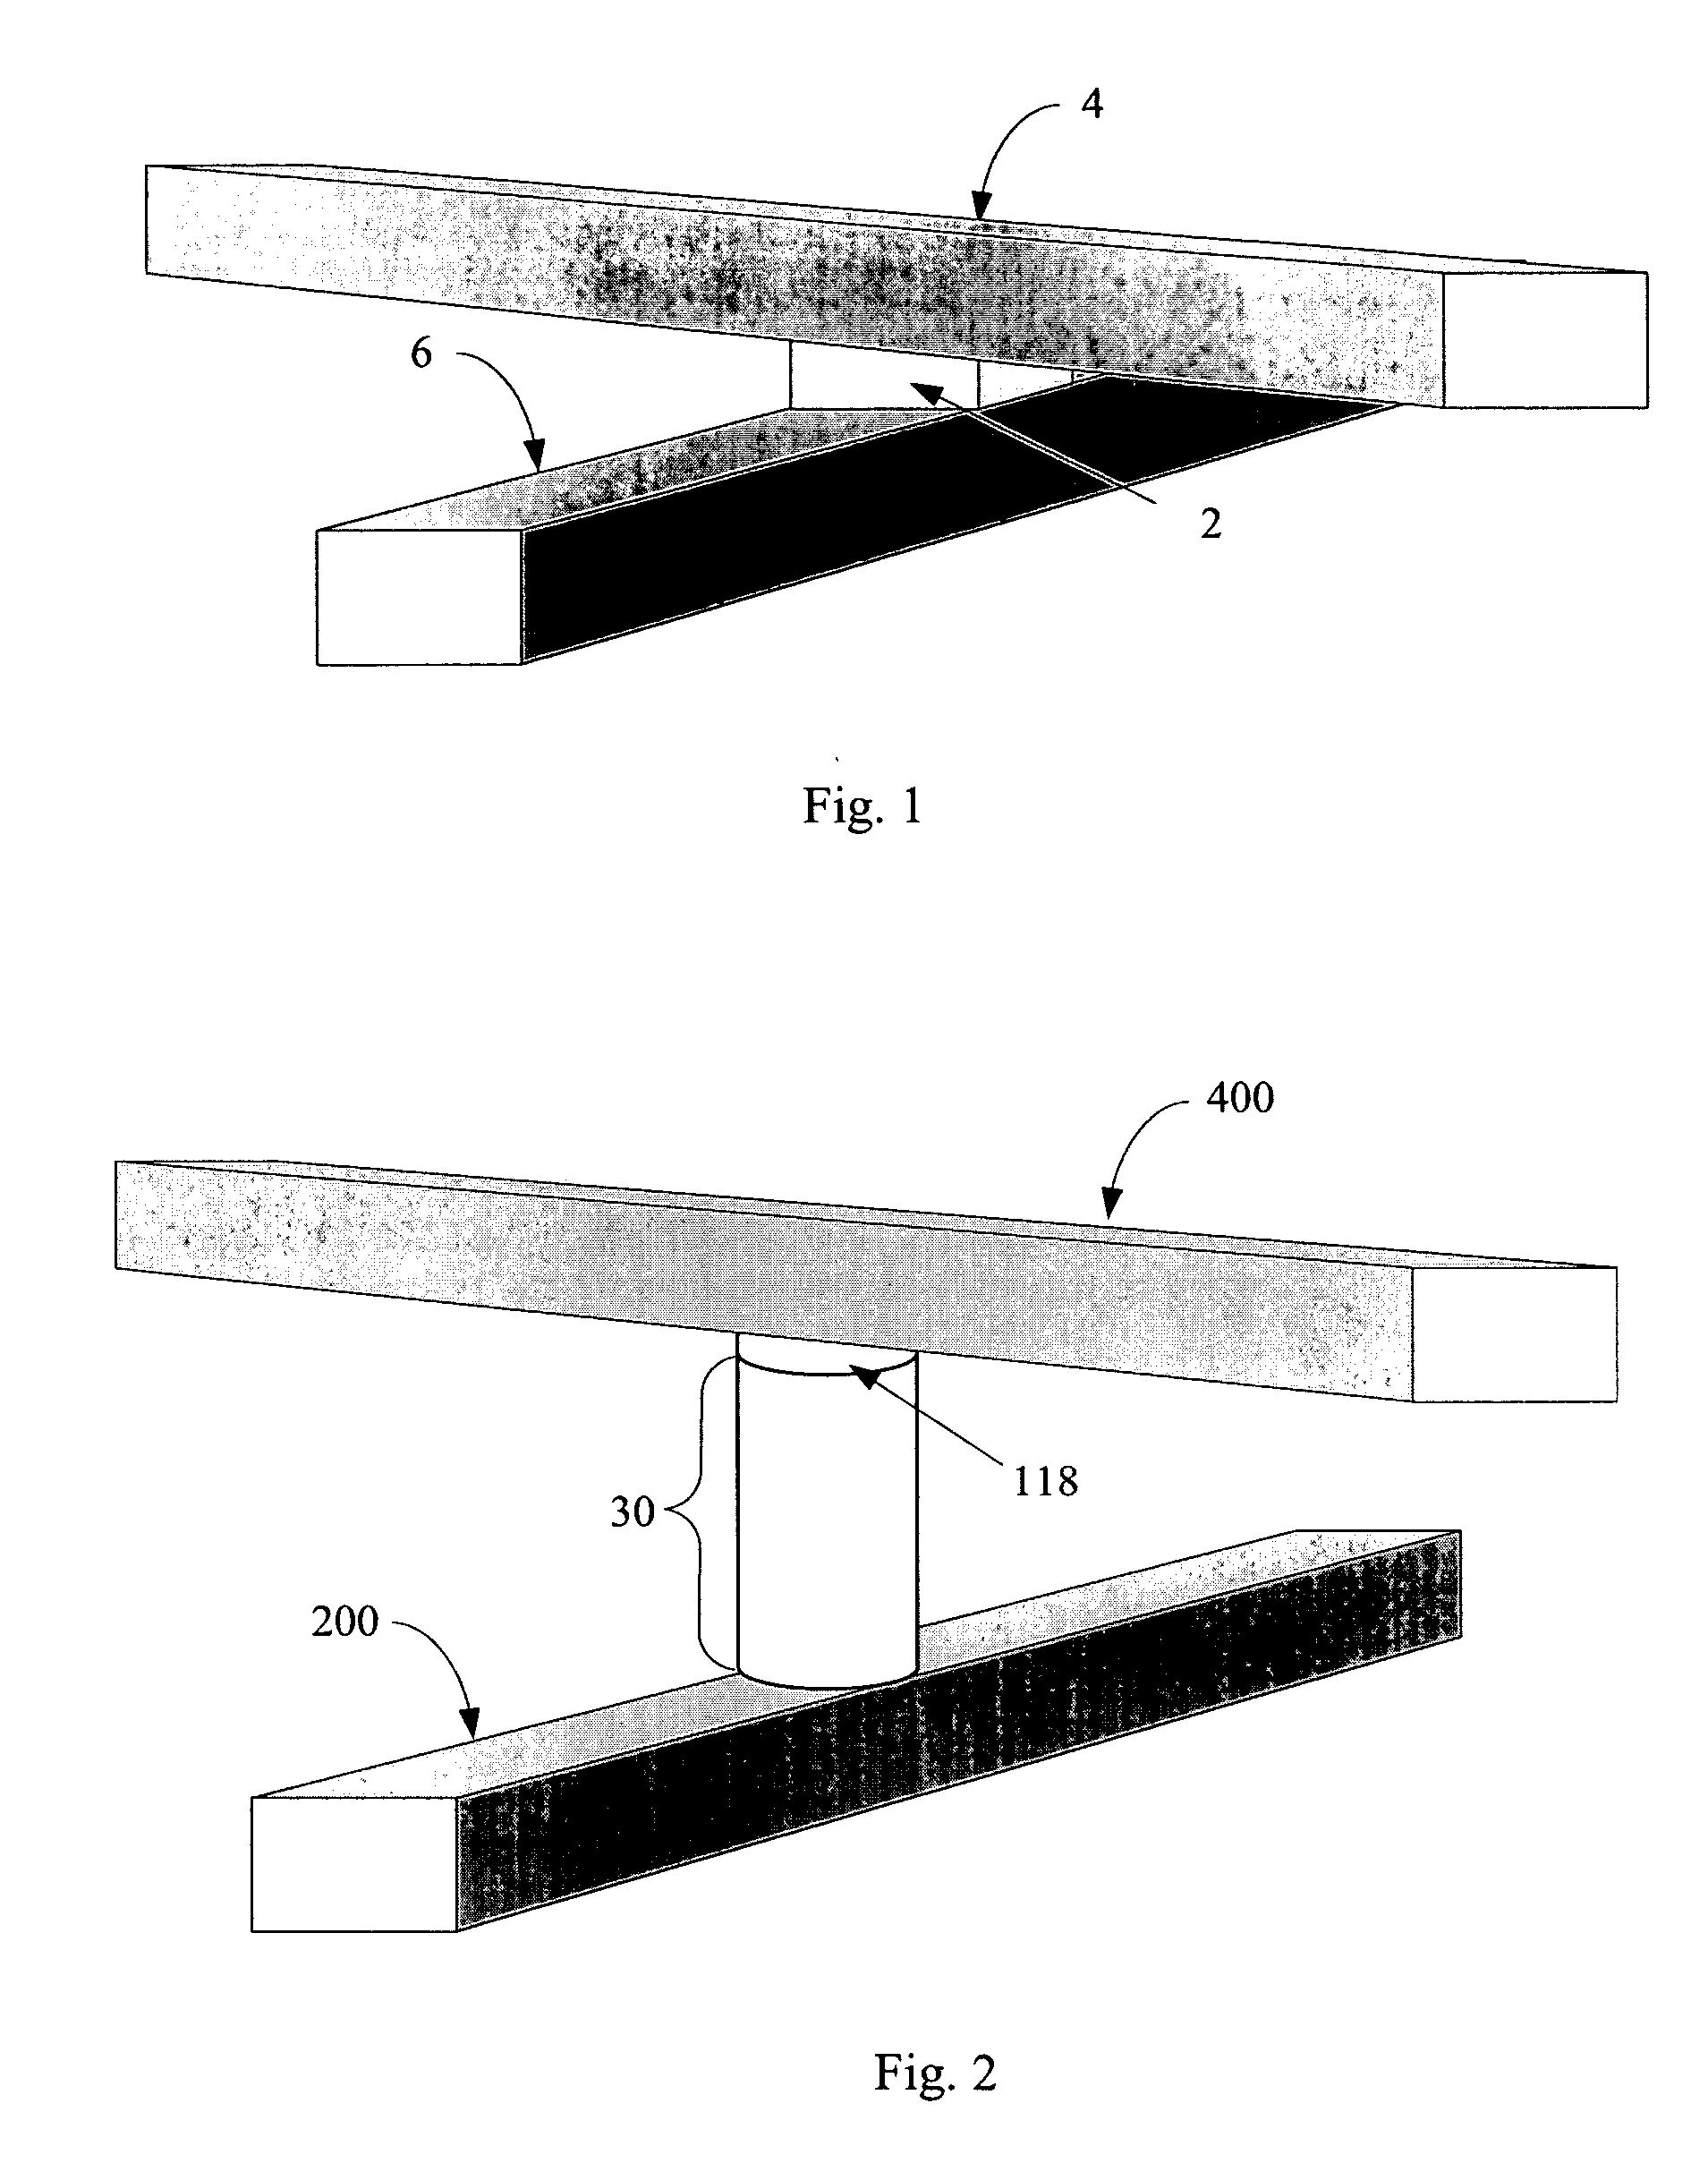 Rewriteable memory cell comprising a diode and a resistance-switching material